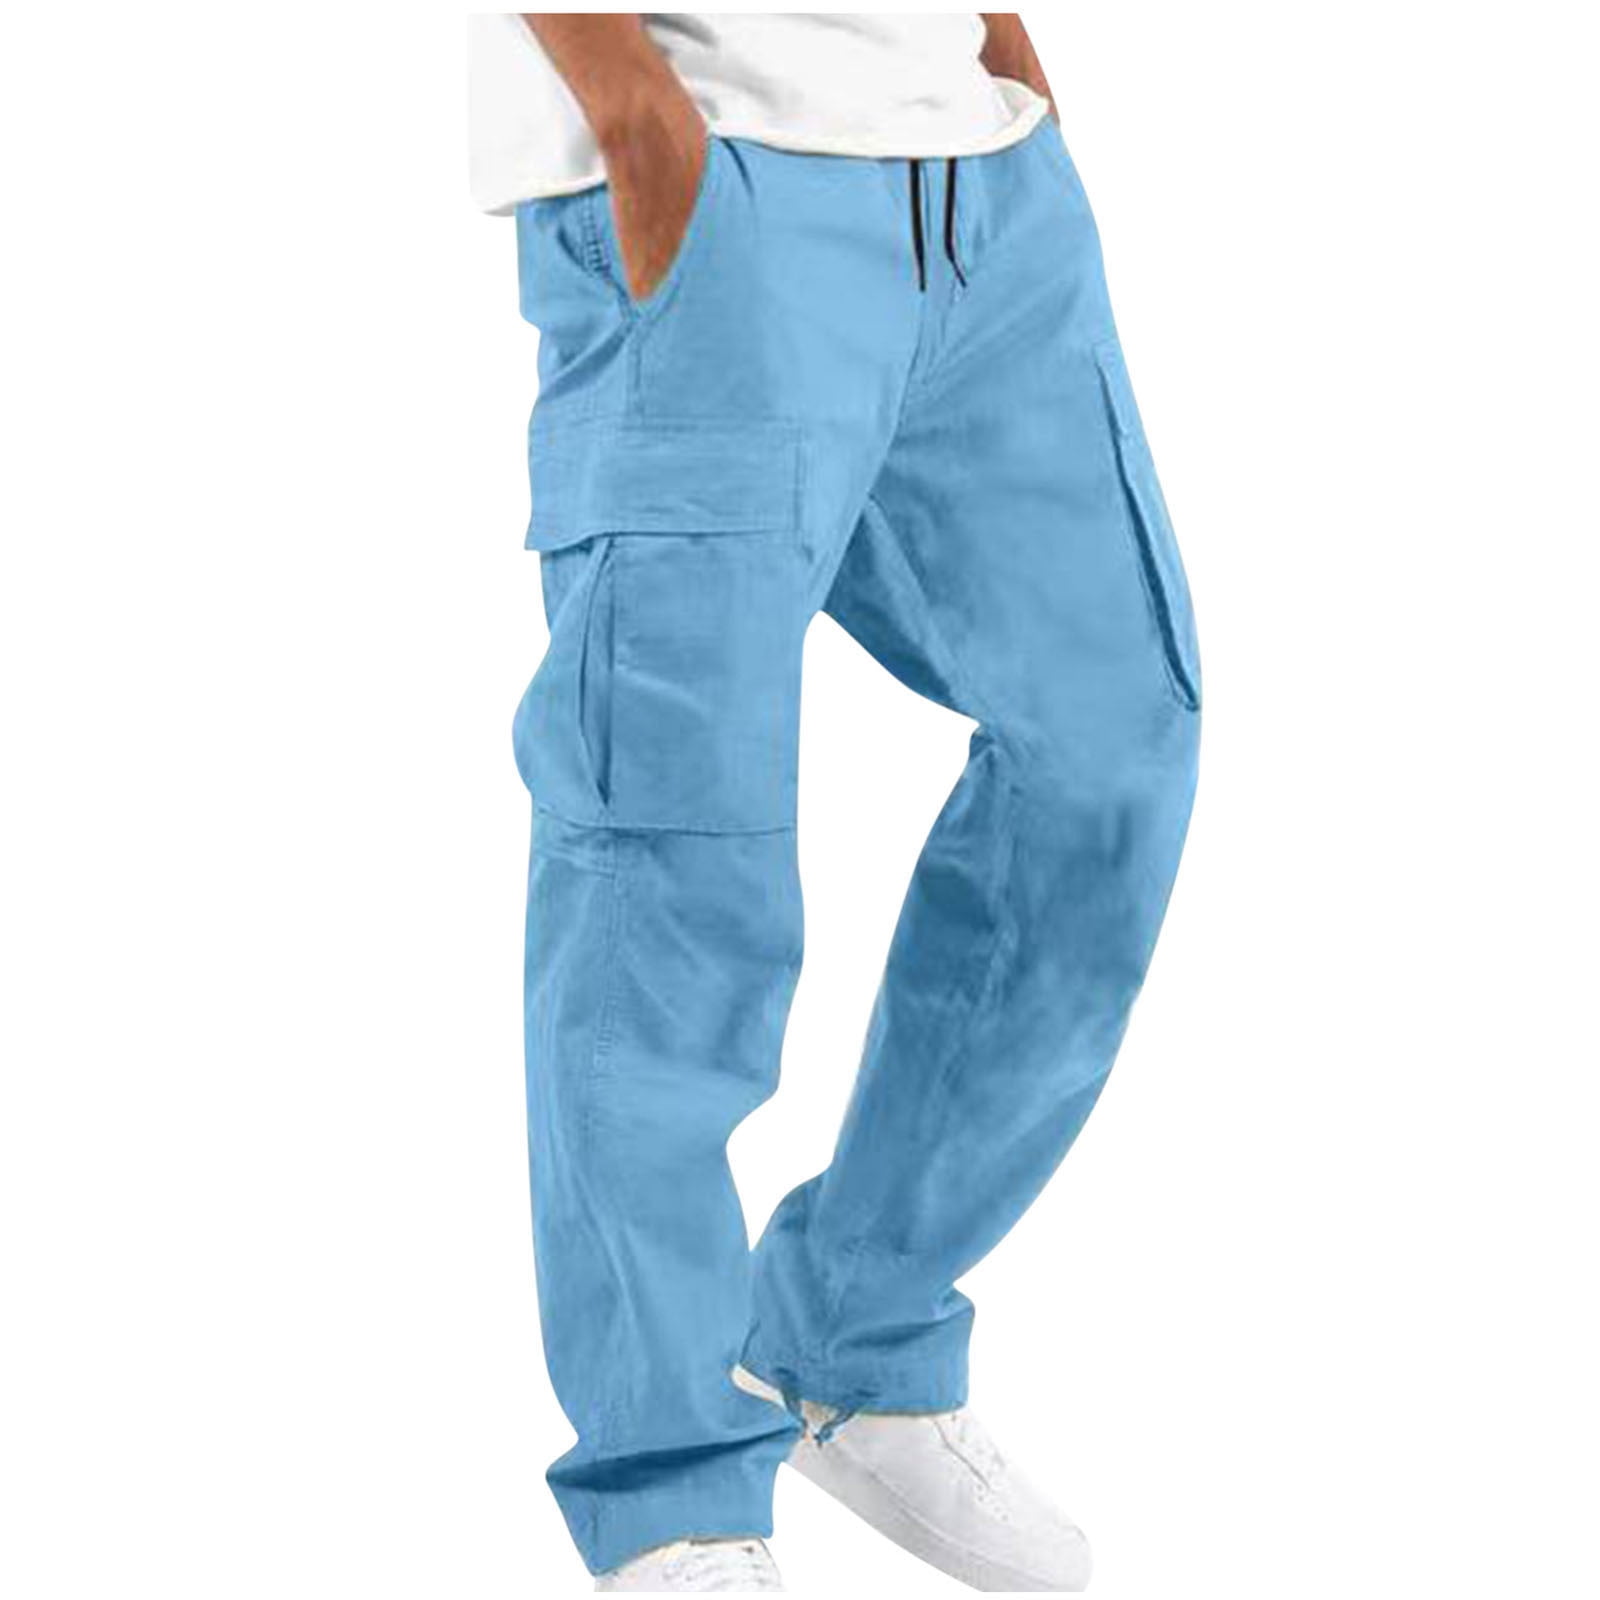 Simplmasygenix Clearance Men's Pants Trousers Men Solid Casual Pockets  Outdoor Straight Type Fitness Pants Sport Pants